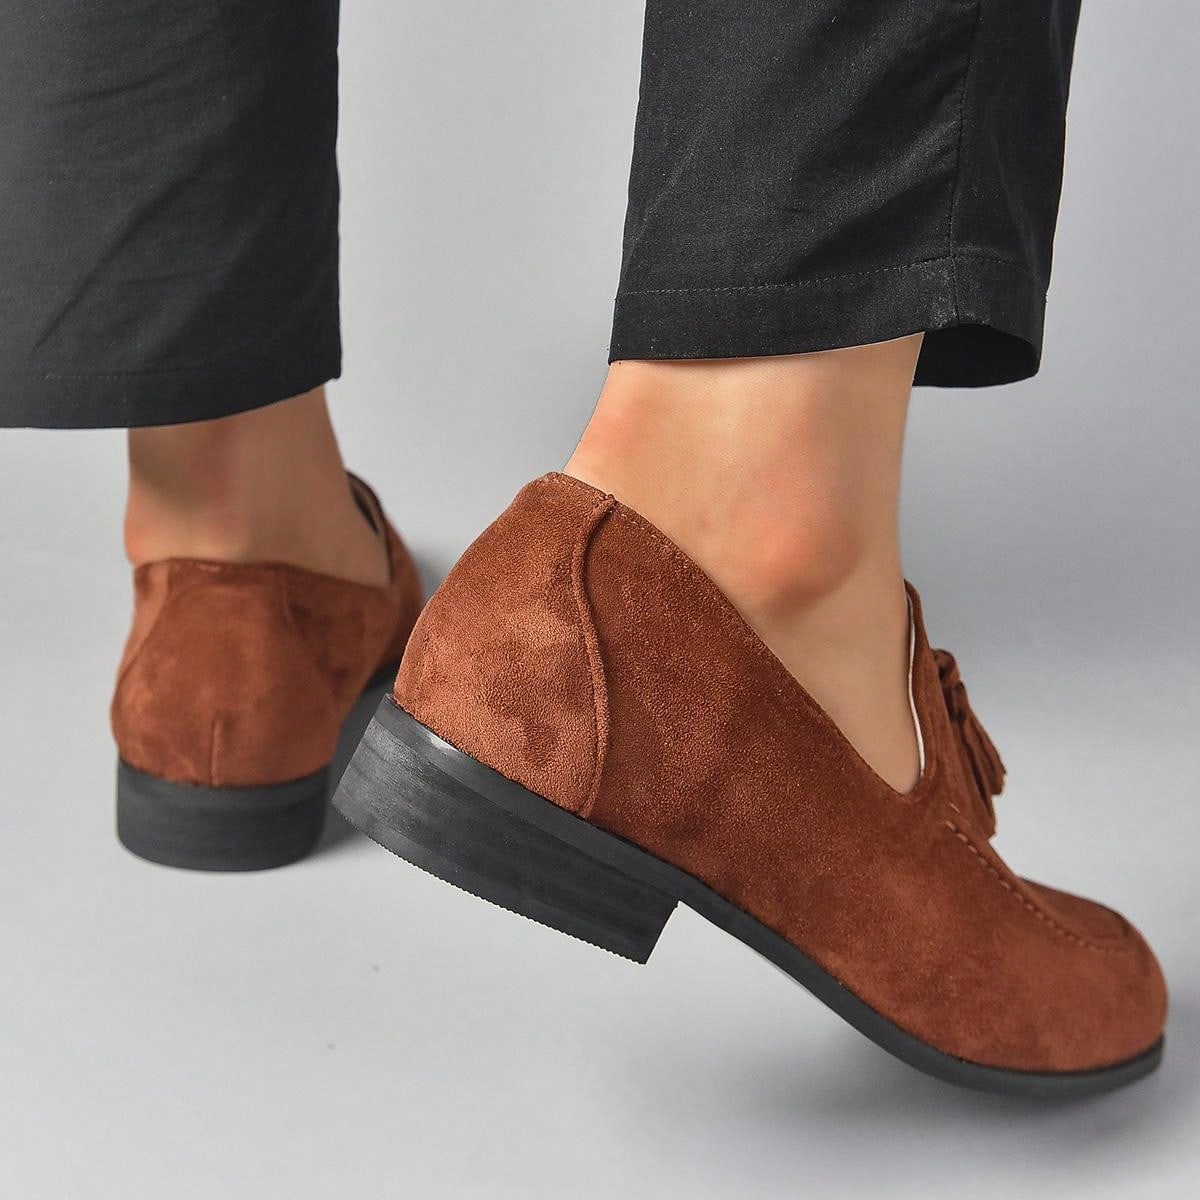 Men's Tassel Loafers, Low-cut Pu Leather Shoes, Casual British One-step Slip-on, Lightweight, Trendy And Versatile